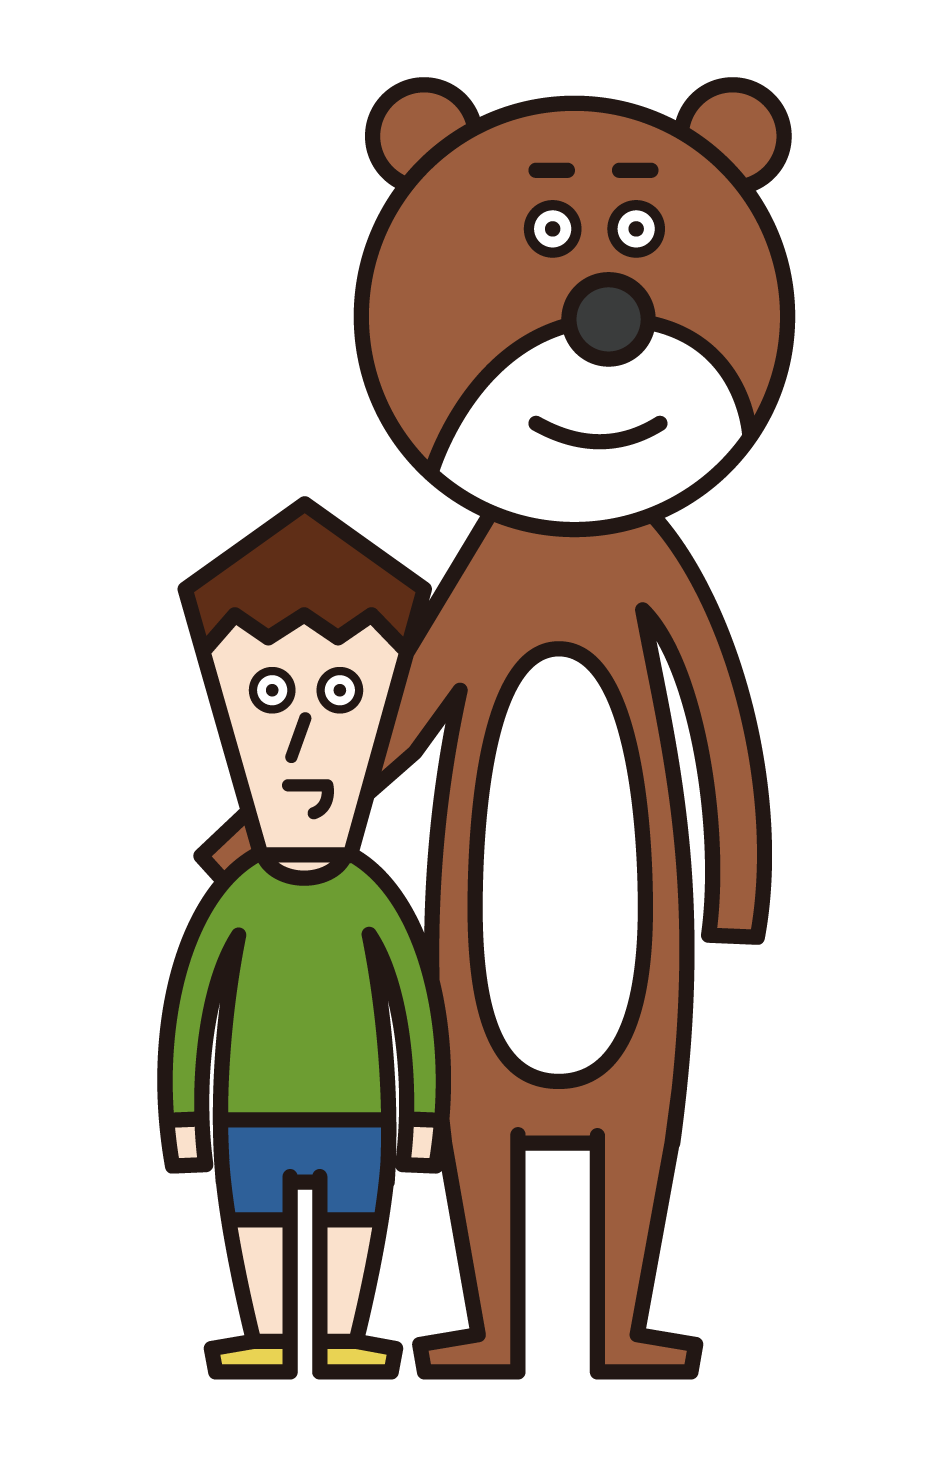 Illustration of a child (boy) taking a photo with a bear costume